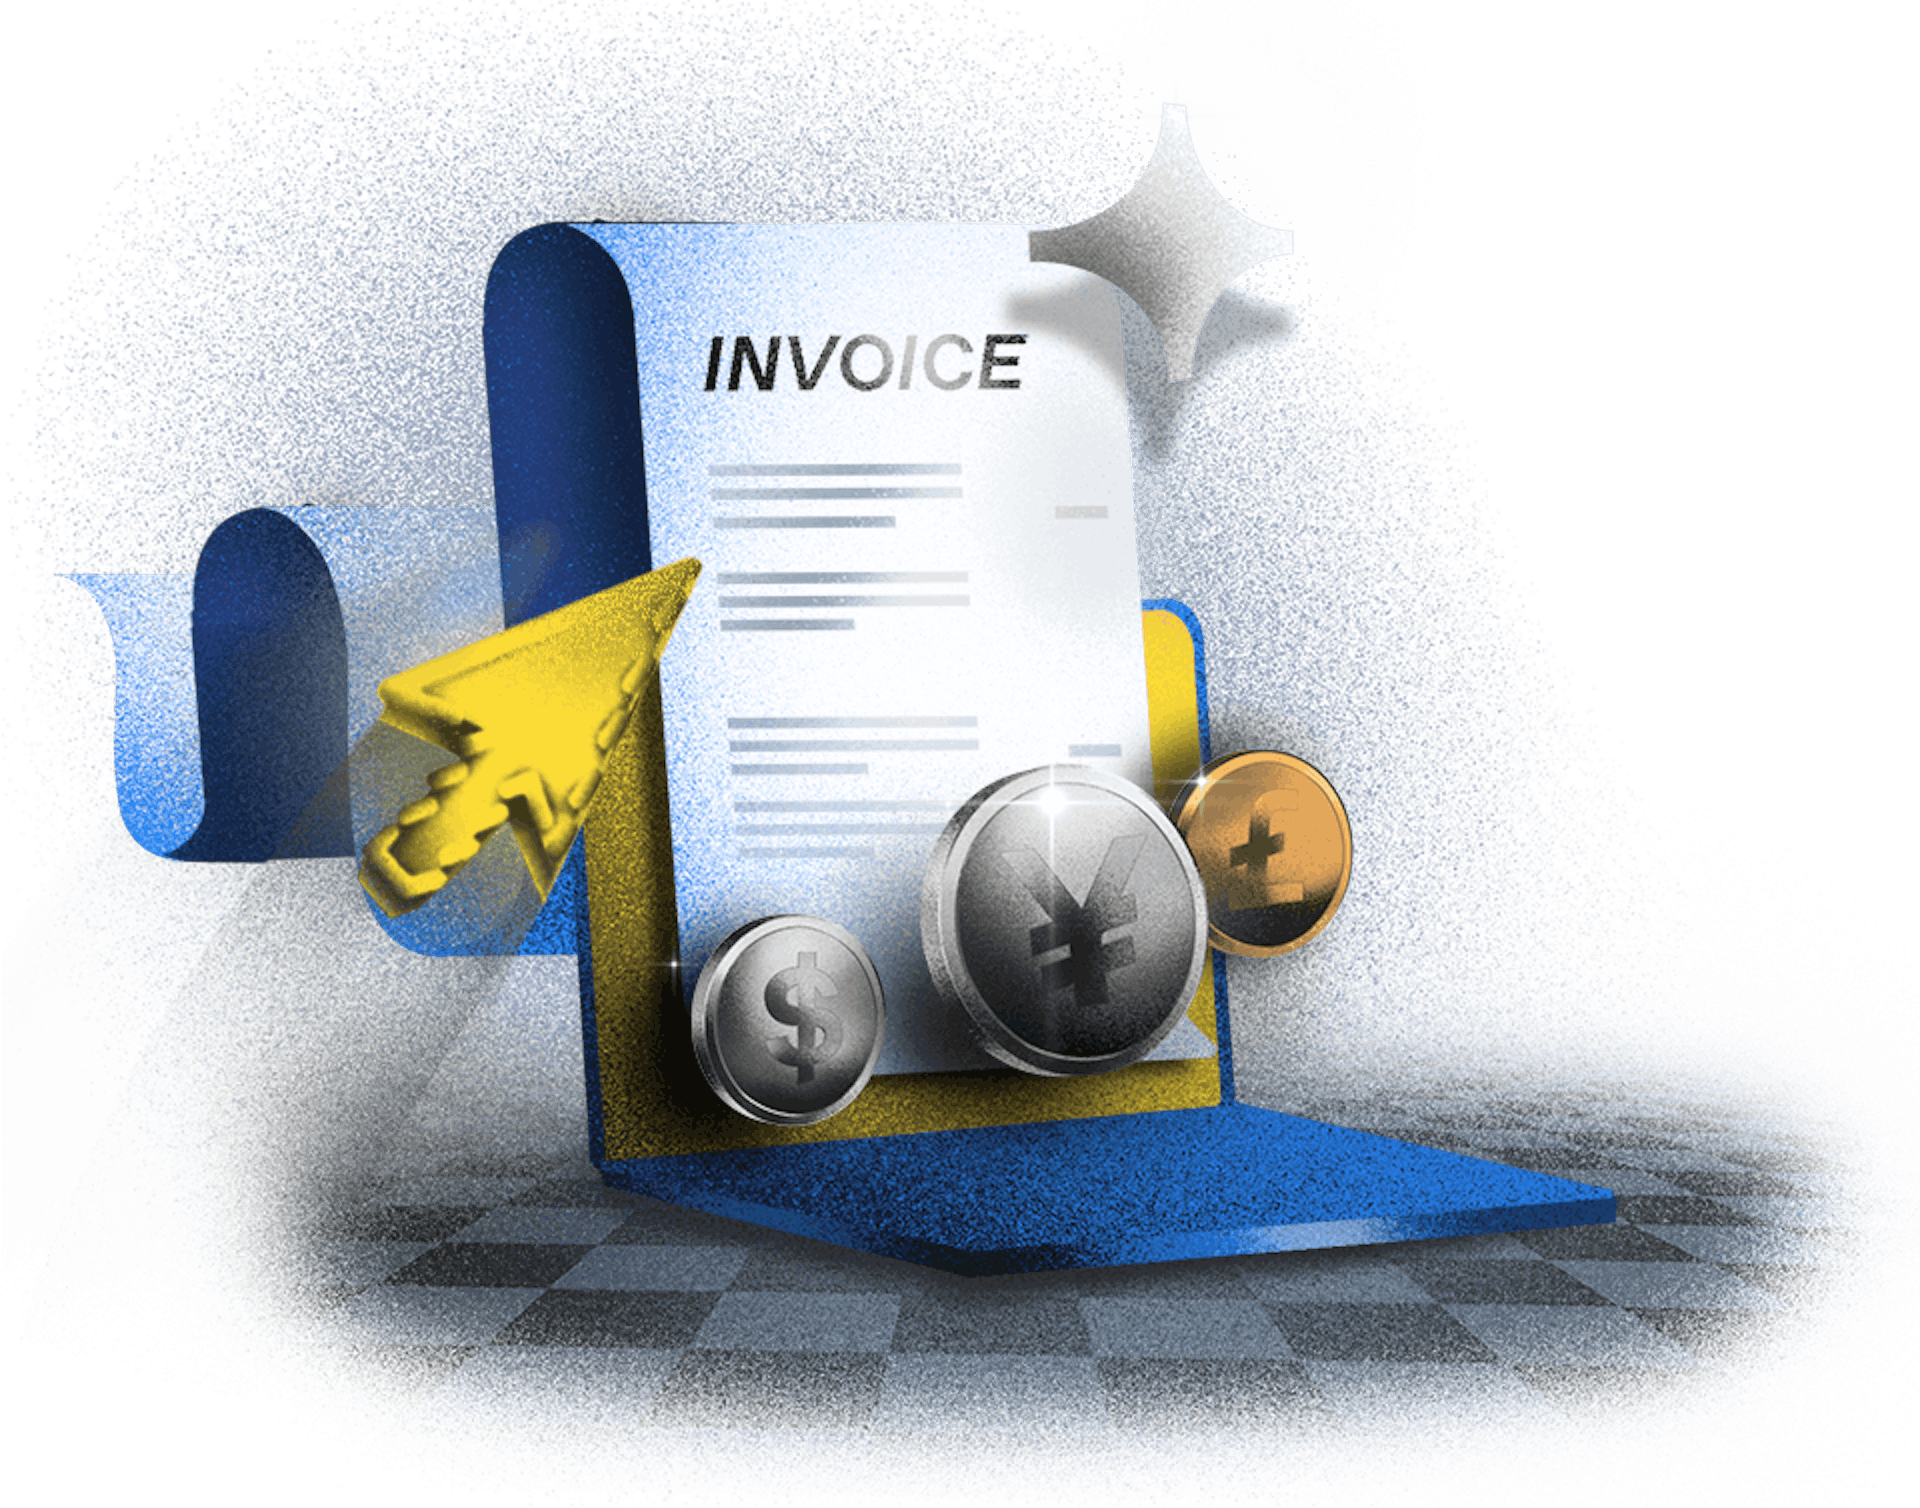 Bill businesses more efficiently with invoicing from Paddle